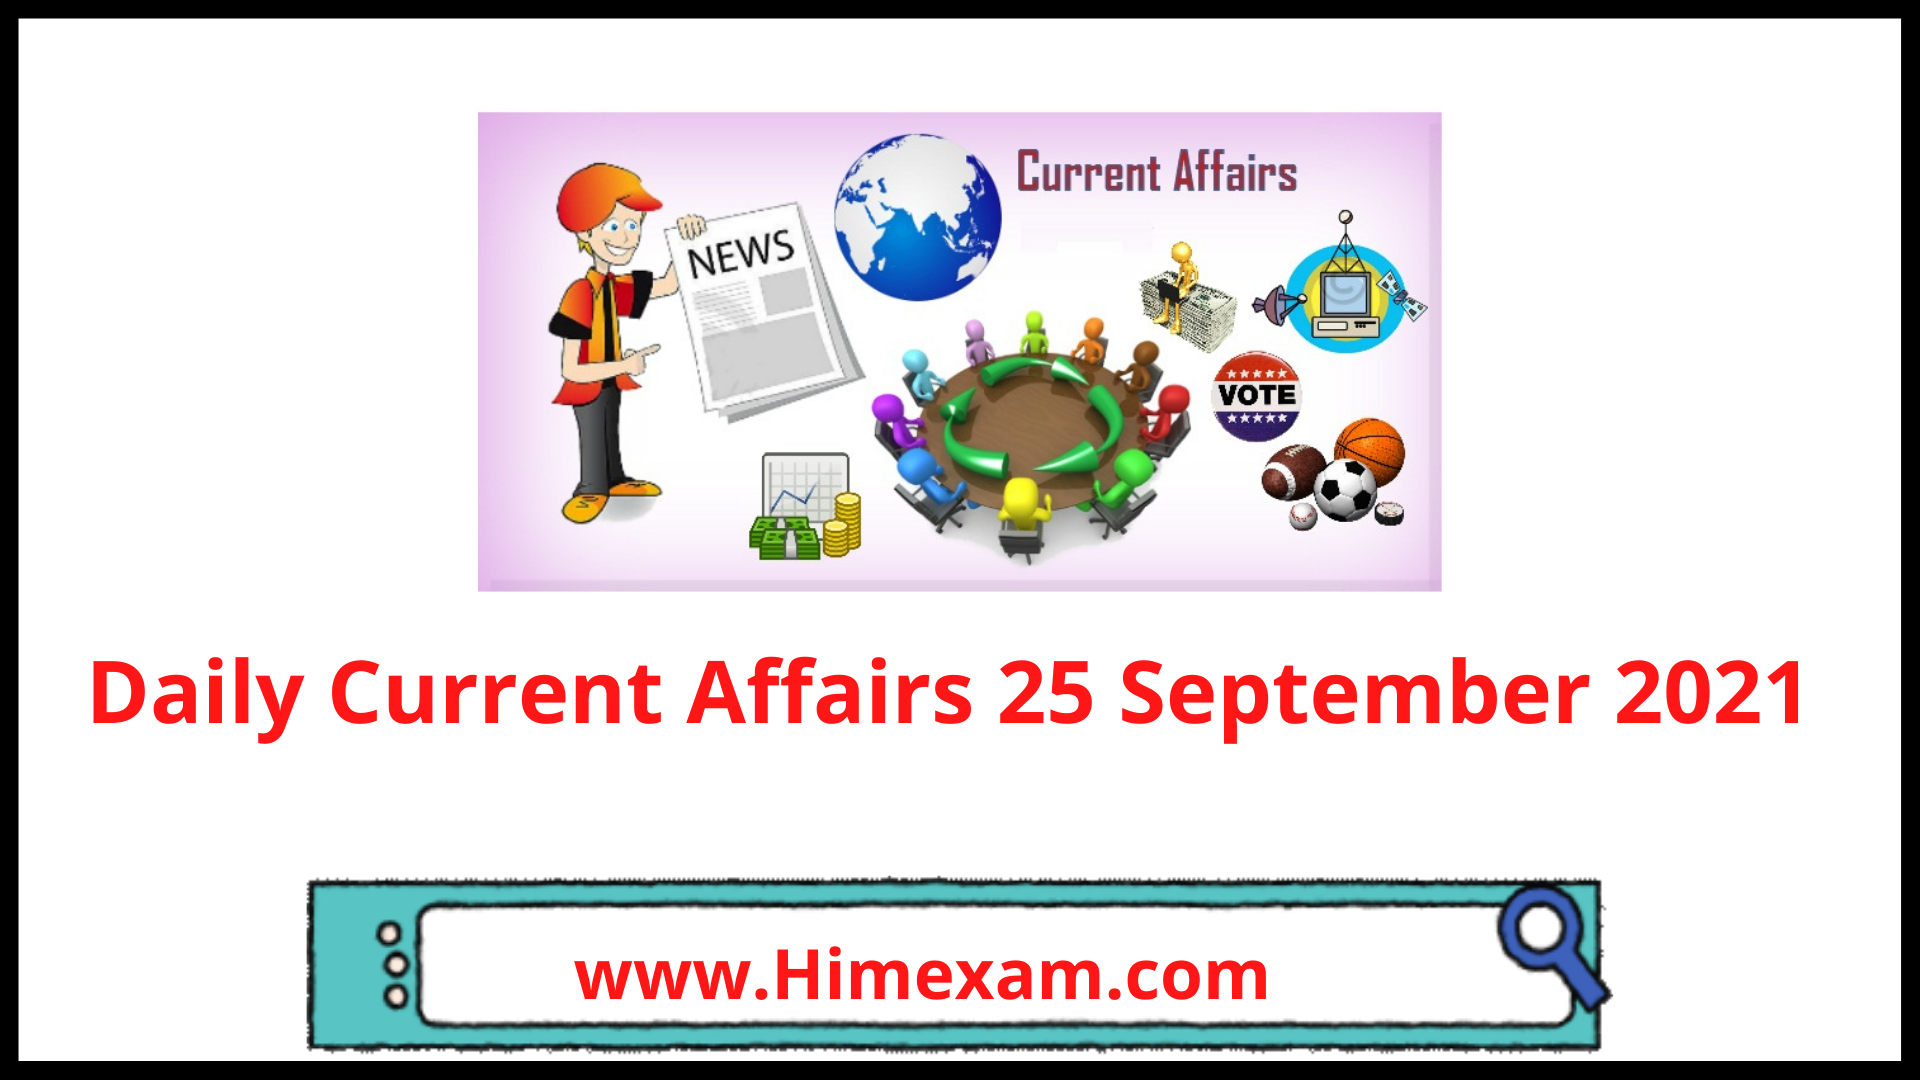 Daily Current Affairs 25 September 2021